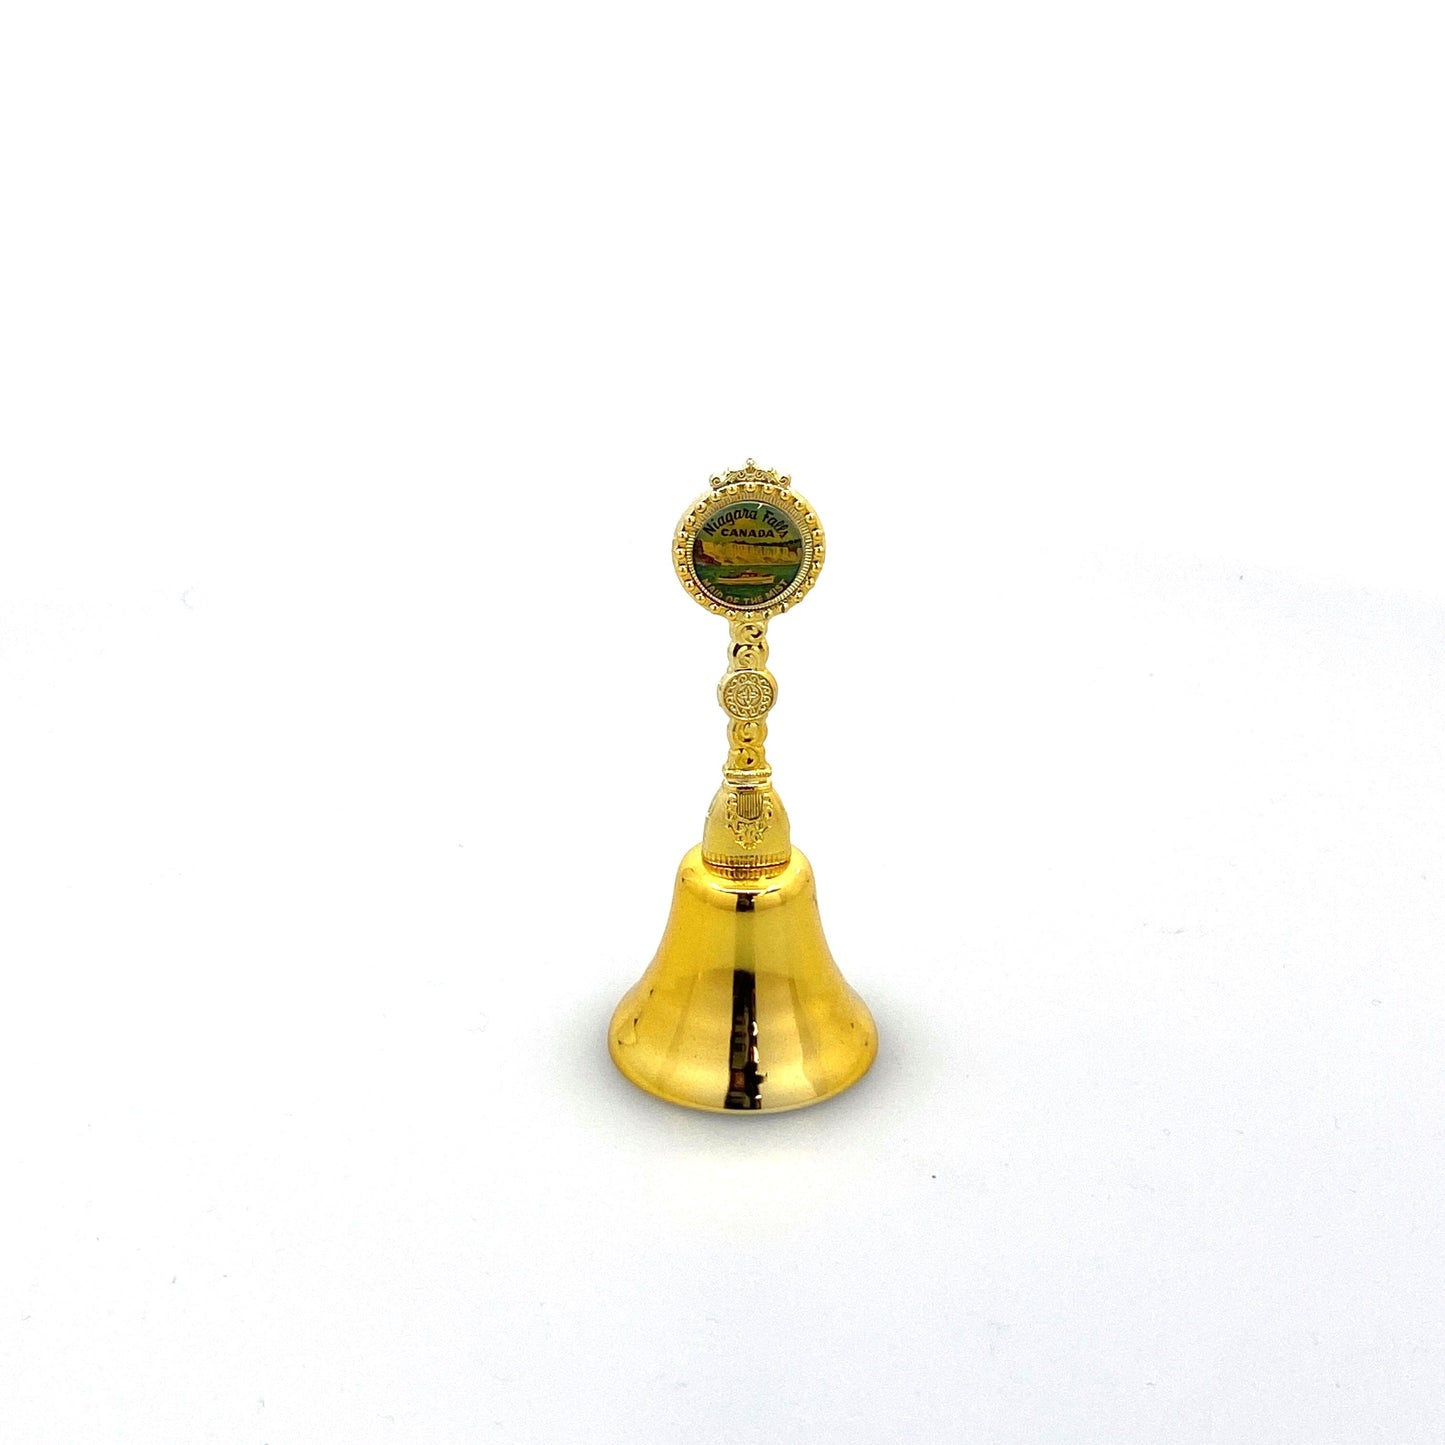 Vintage Hand Bell Travel Tourism Collectible Gold - Niagara Falls